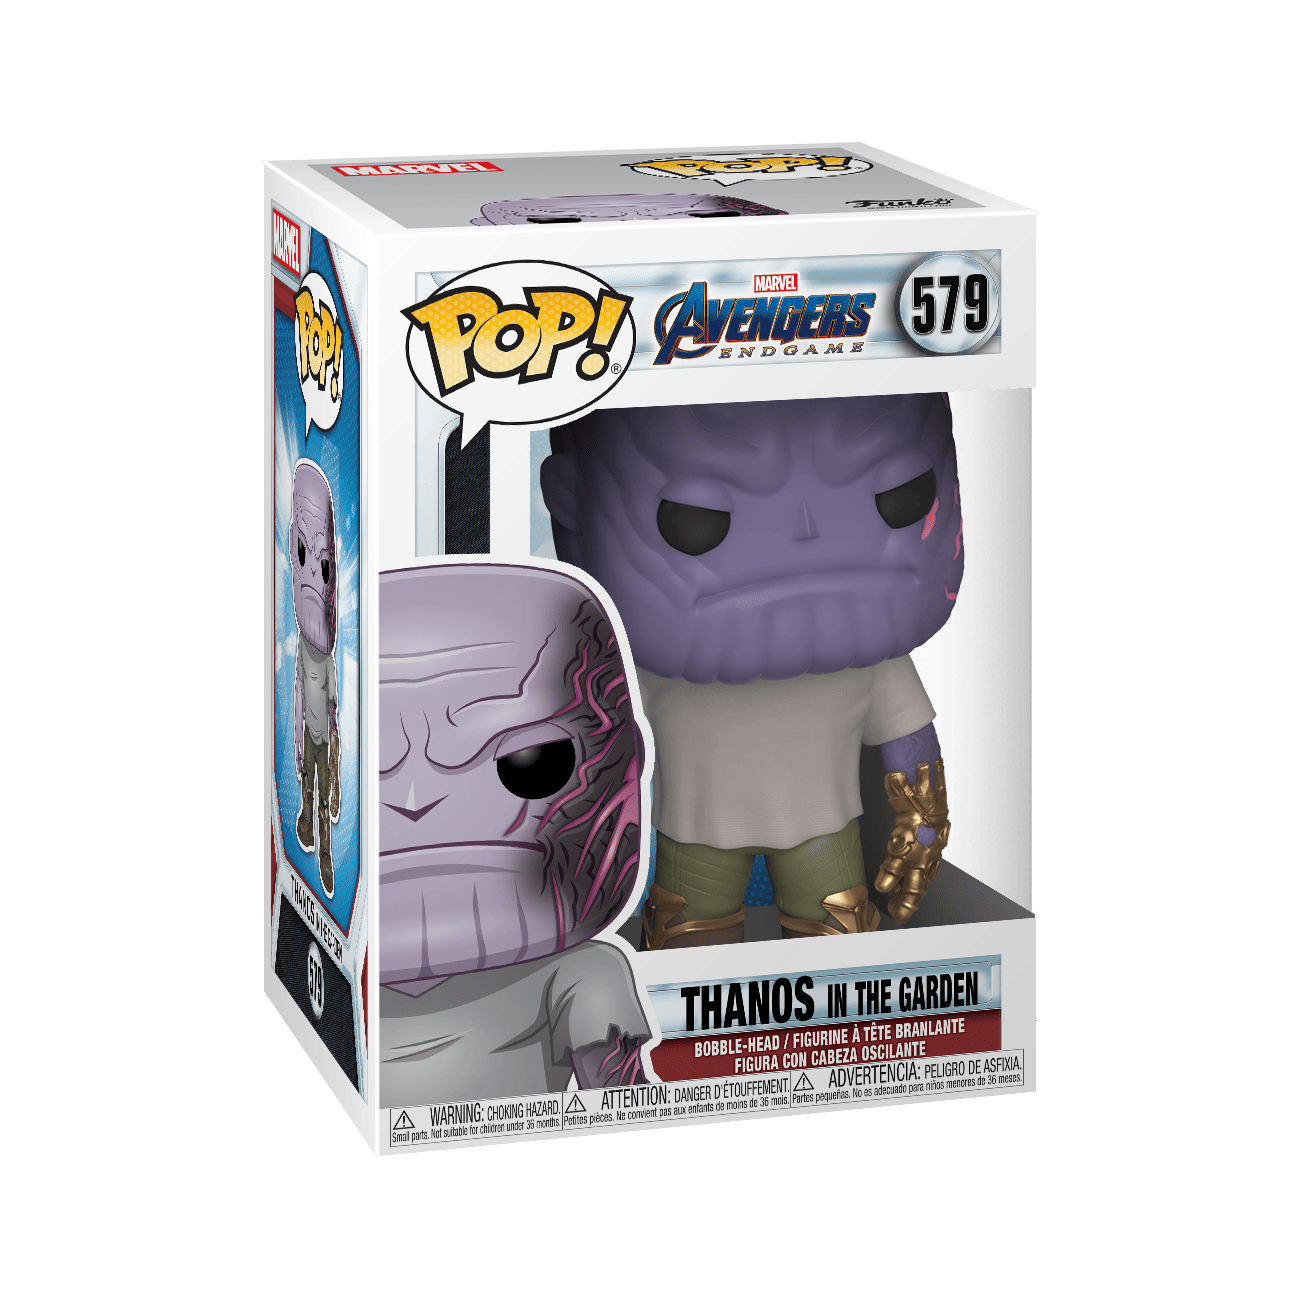 Buy Variety Pop! Stand Bases 10-Pack at Funko.